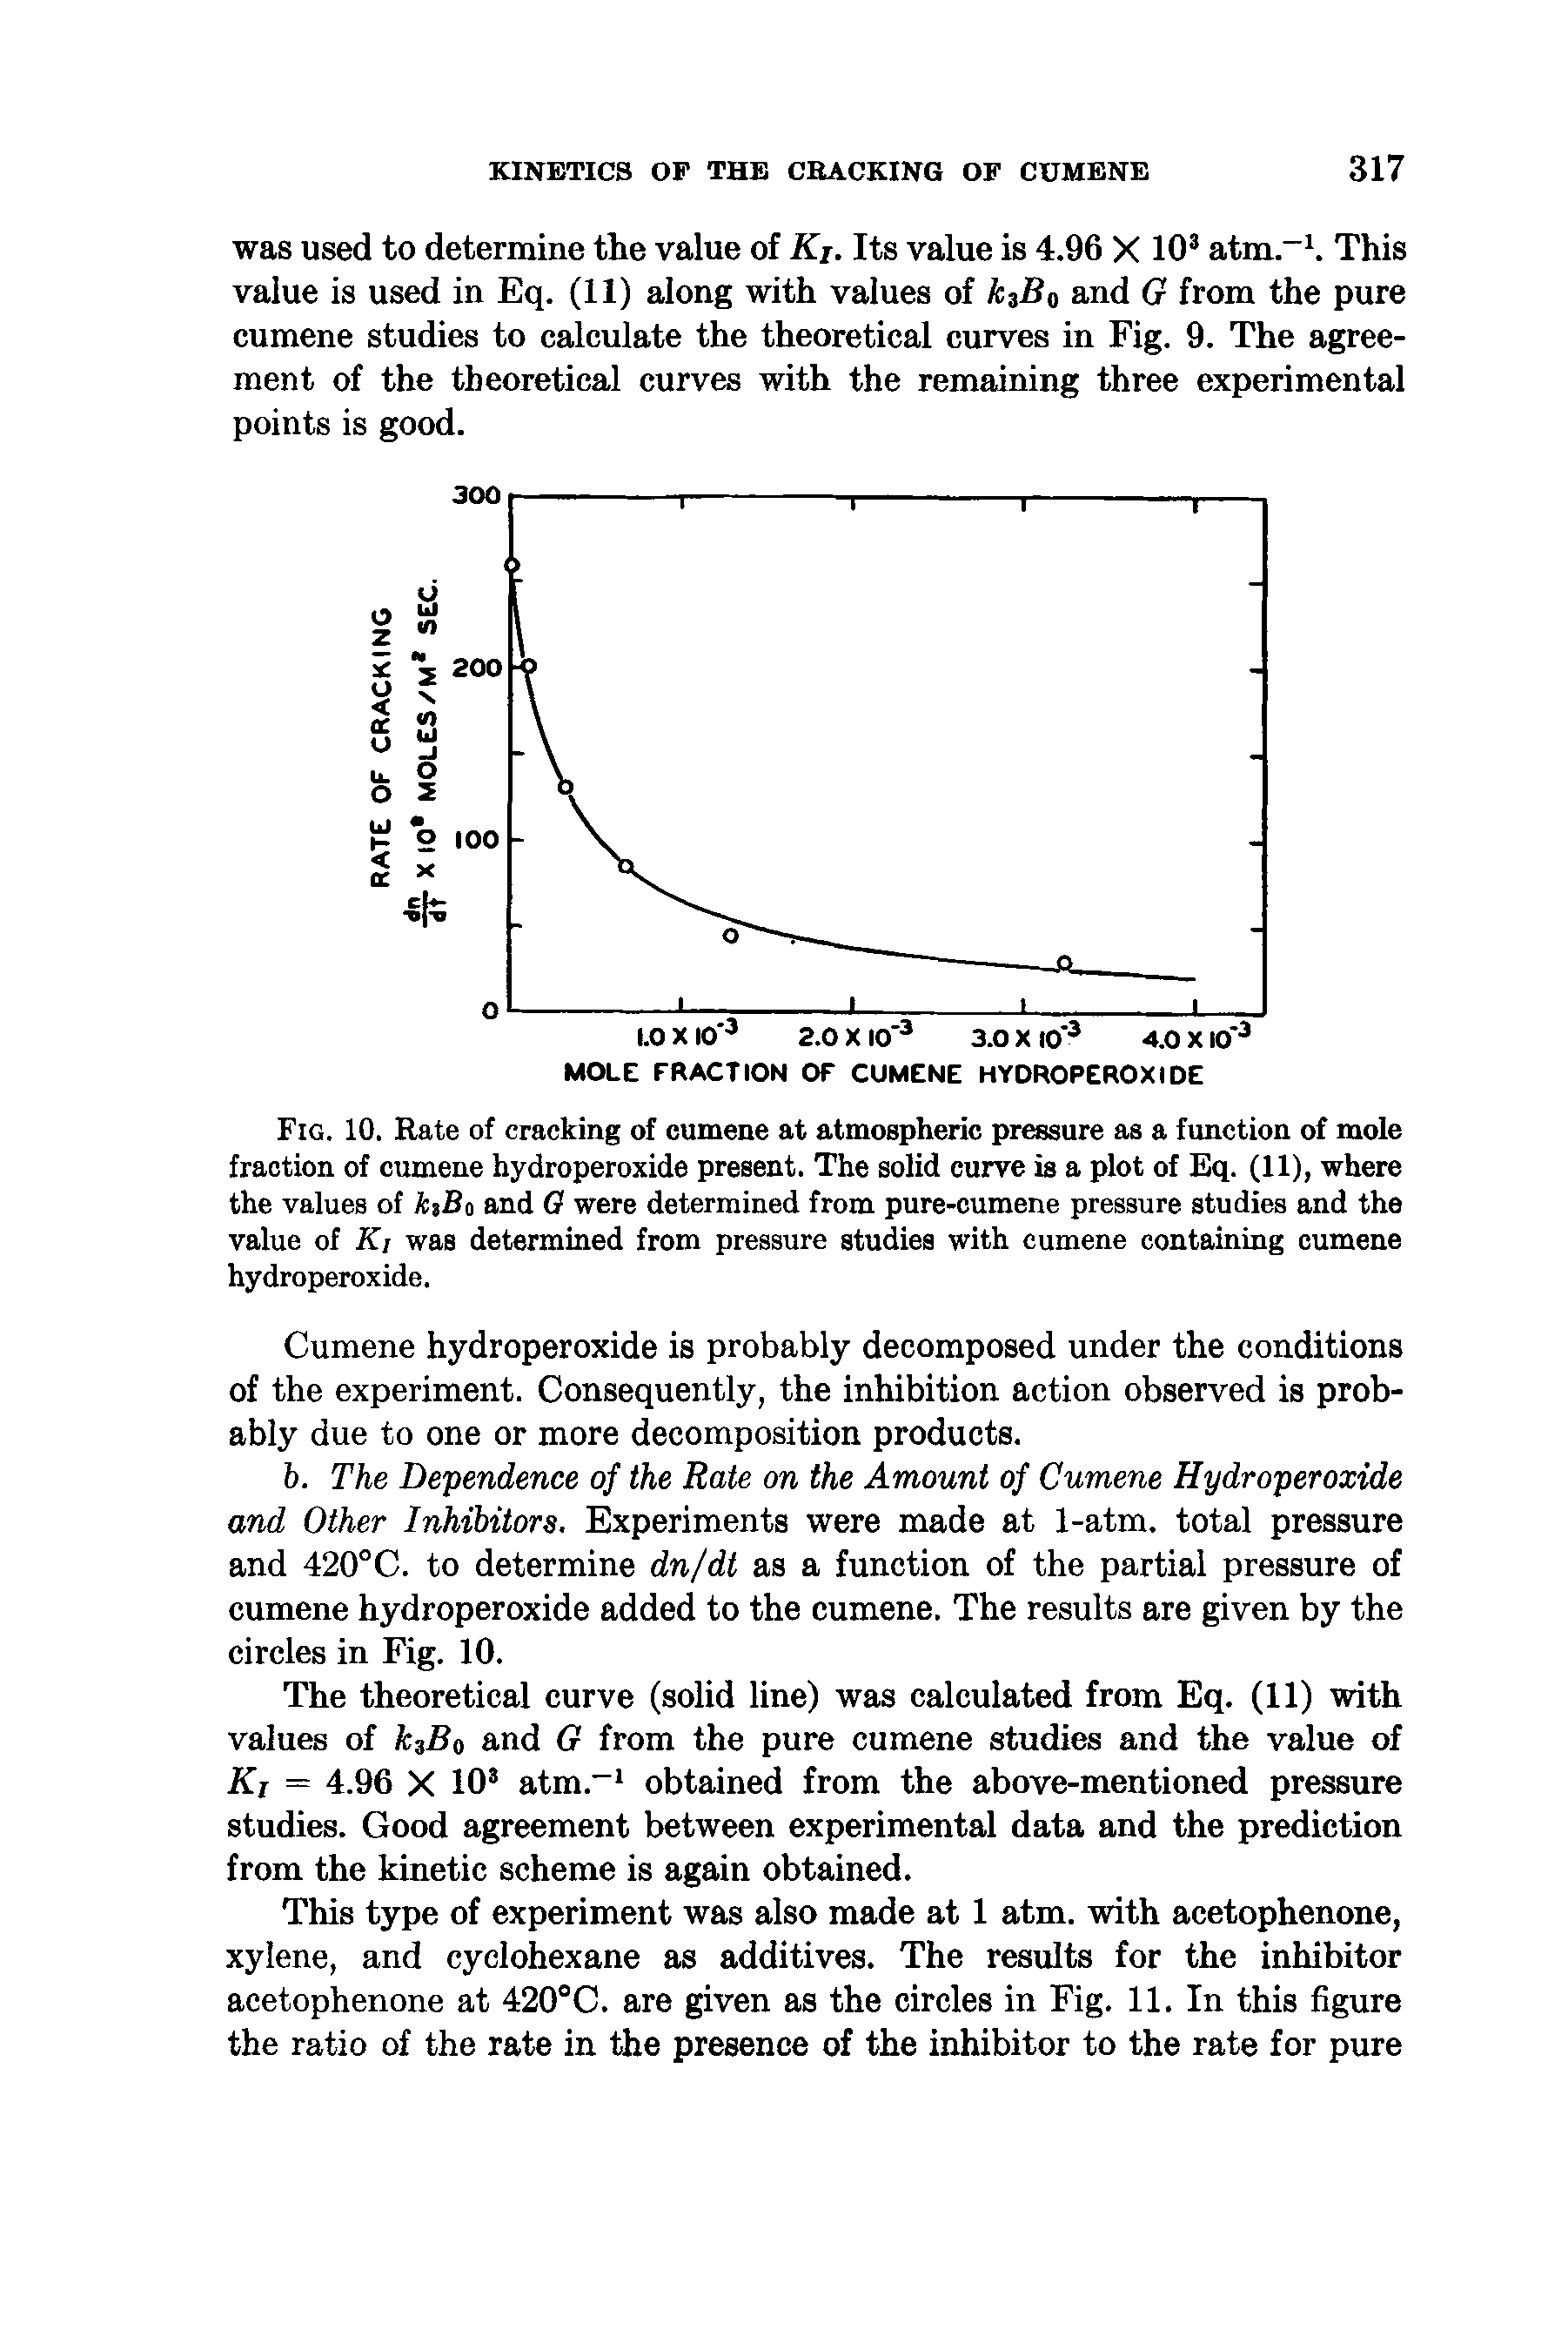 Fig. 10. Rate of cracking of cumene at atmospheric pressure as a function of mole fraction of cumene hydroperoxide present. The solid curve is a plot of Eq. (11), where the values of kiBo and 0 were determined from pure-cumene pressure studies and the value of Ki was determined from pressure studies with cumene containing cumene hydroperoxide.